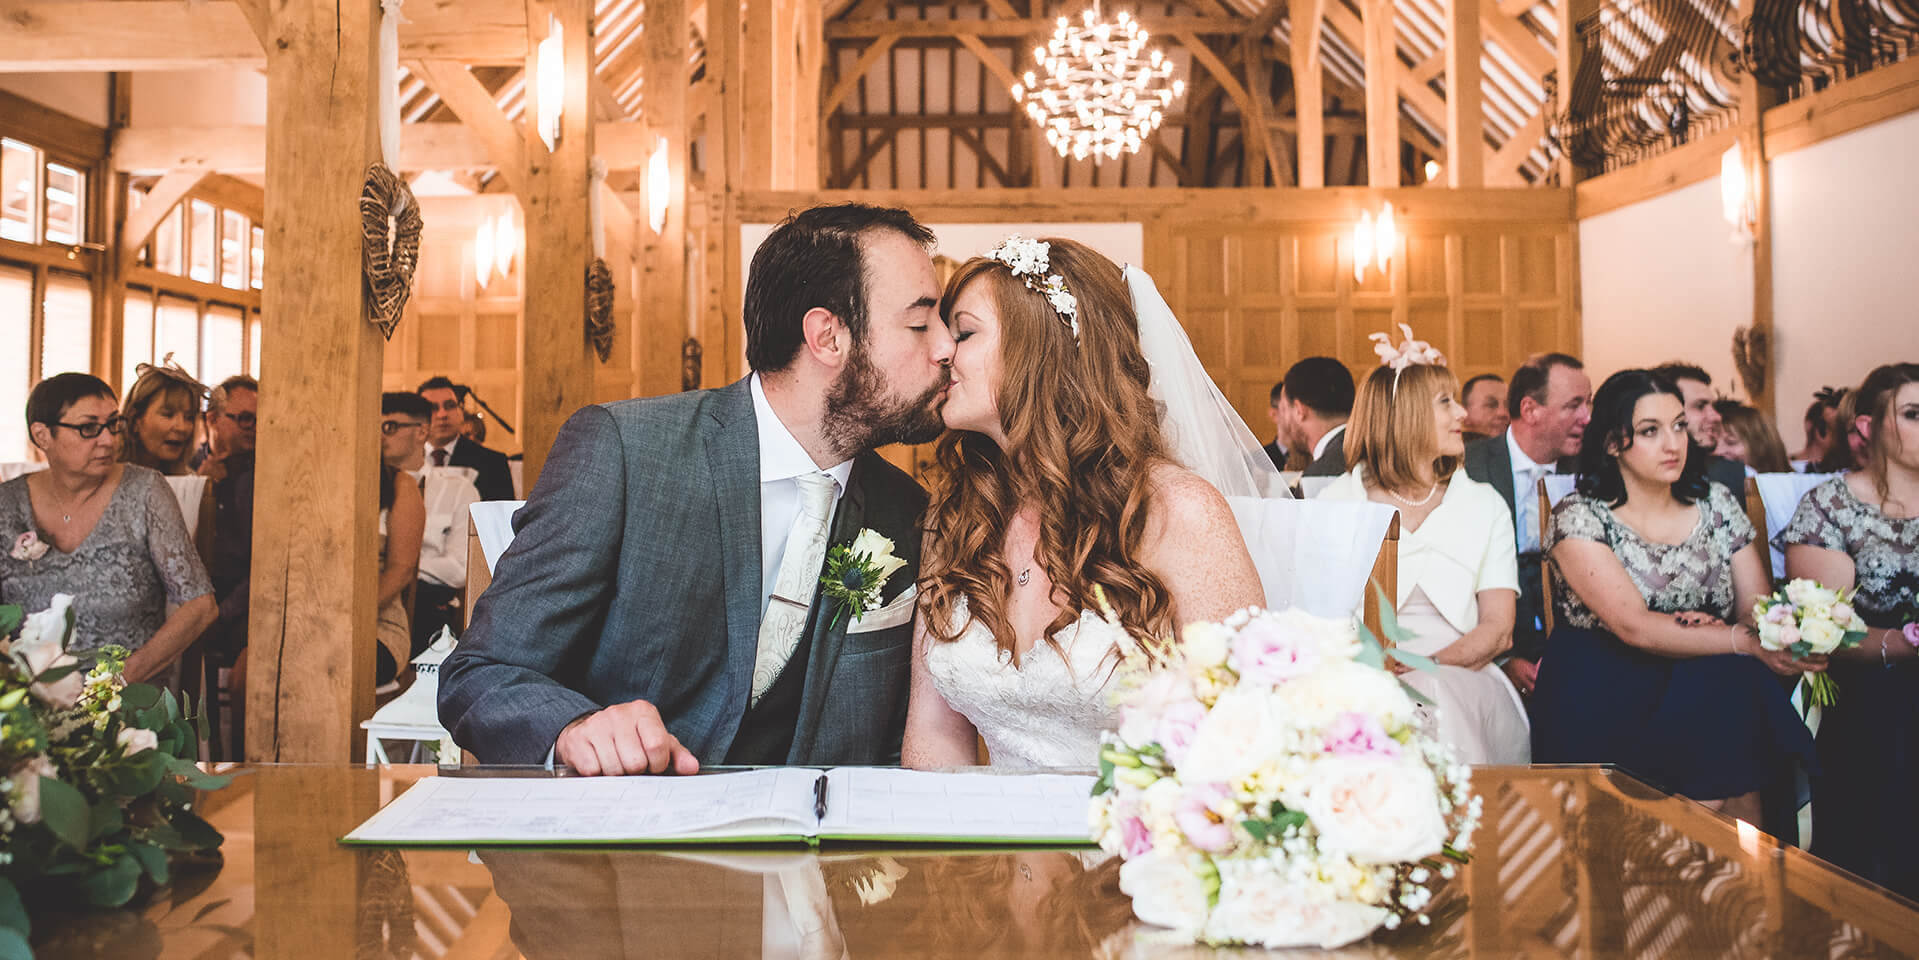 An image of the bride and groom sharing a kiss at their beautiful Hampshire wedding venue